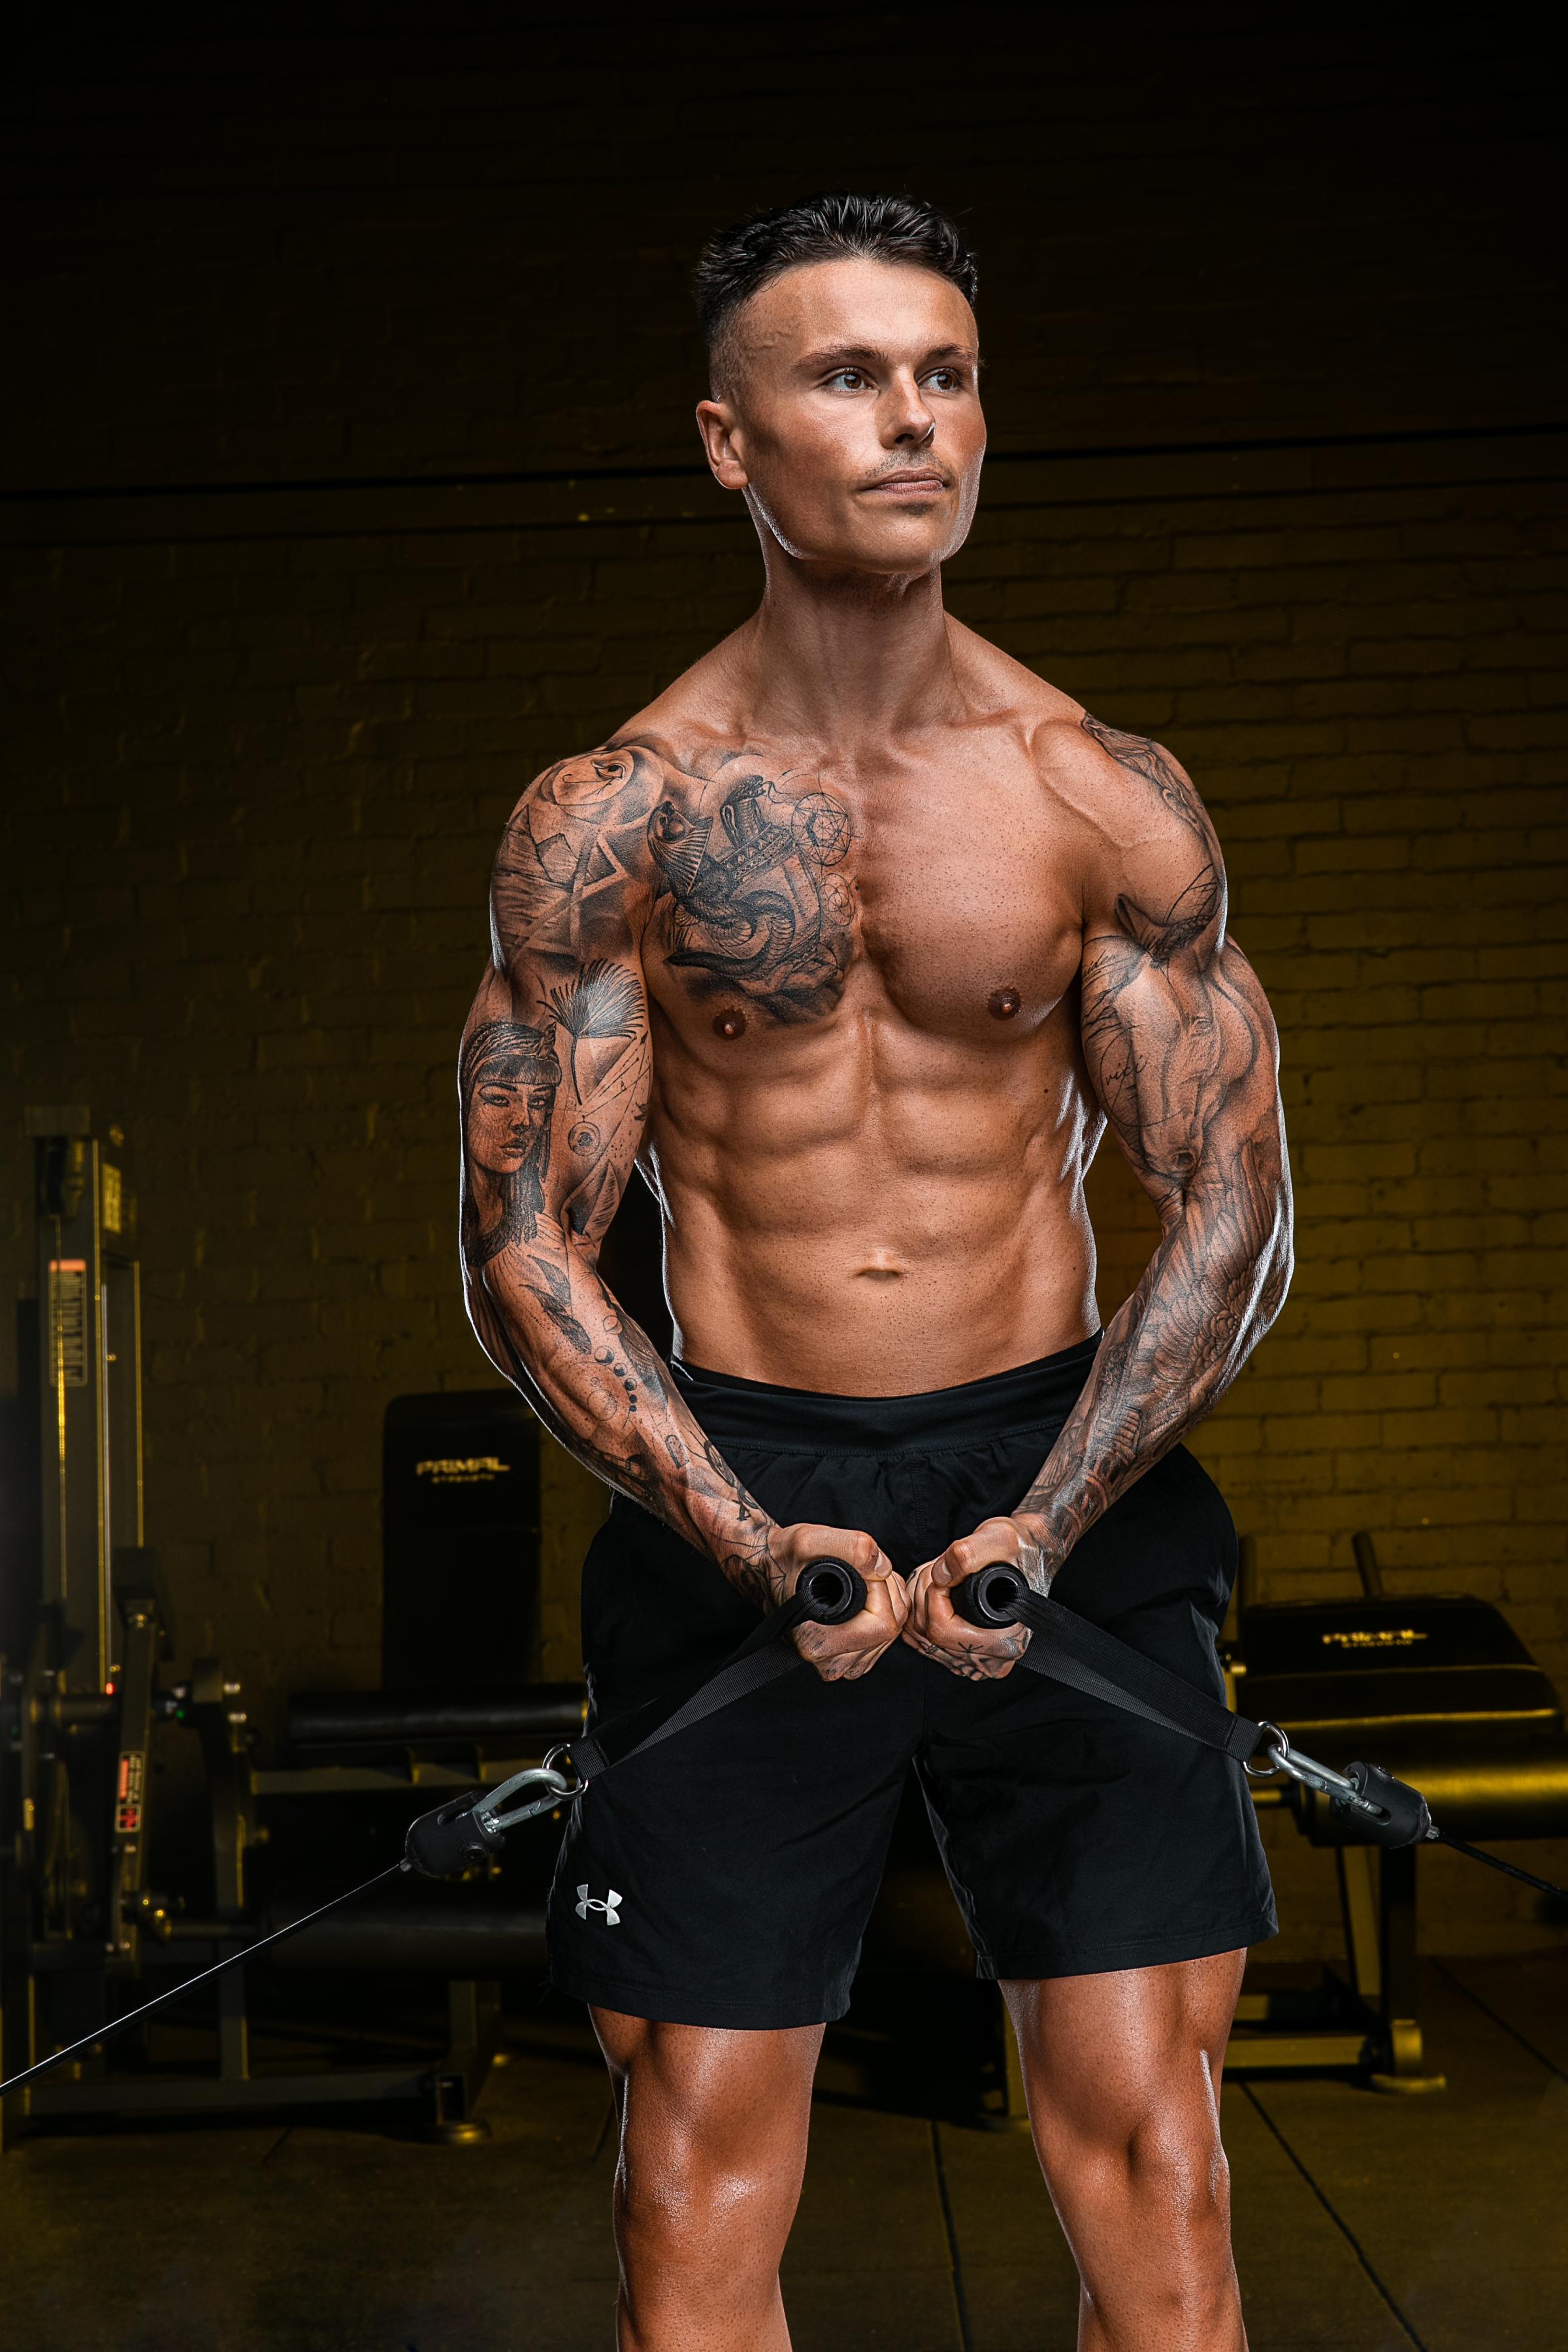 Aidan now lives in Dubai where he is an online personal trainer and fitness coach (Matt Marsh Photography)